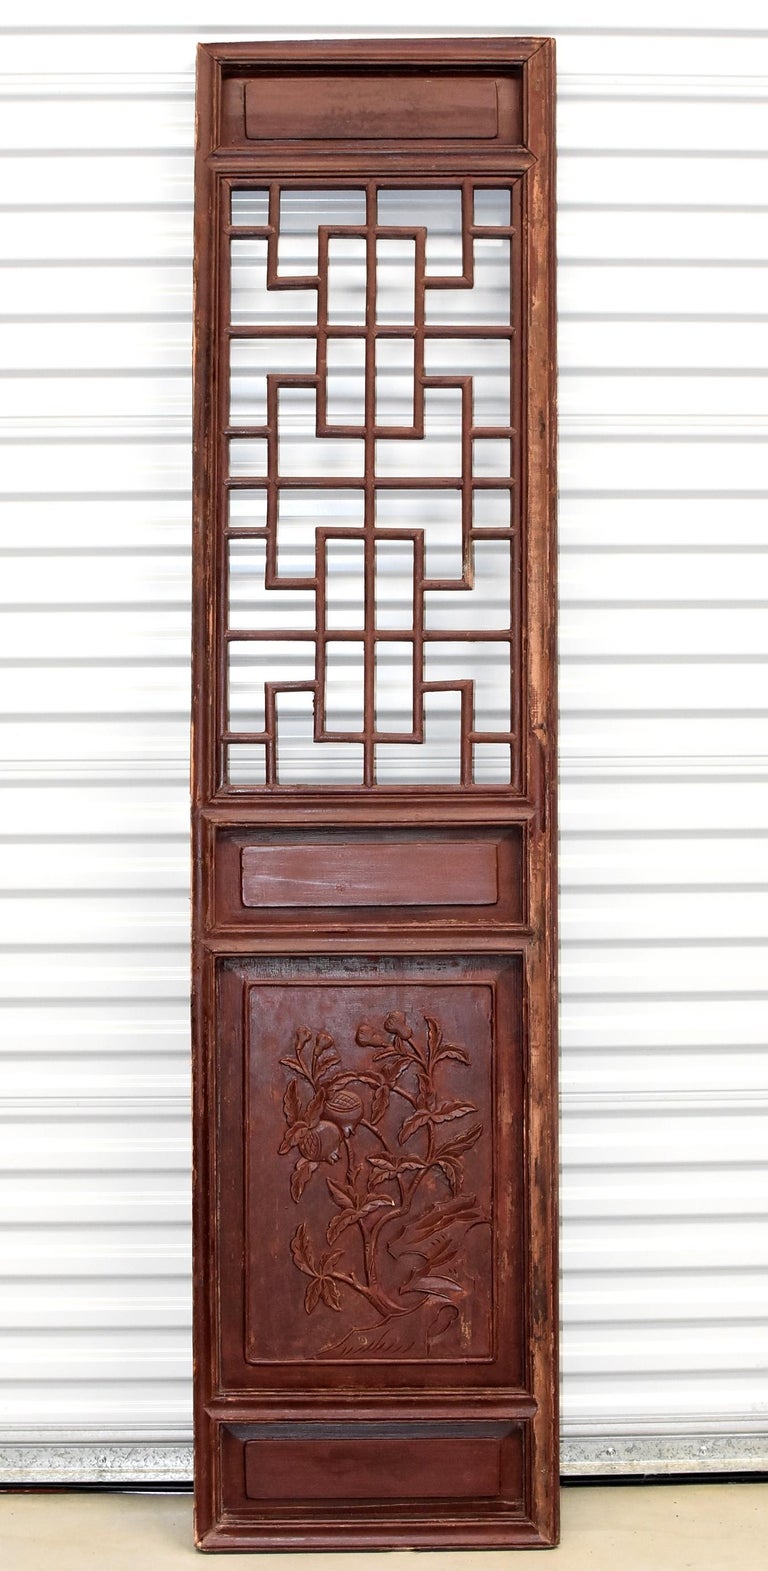 This is a pair of beautiful, early 20th century Chinese antique door screens. The top section is formed by a Chinese longevity pattern, which are created by joining custom-cut pieces of wood using tenons and mortises, an incredibly painstaking